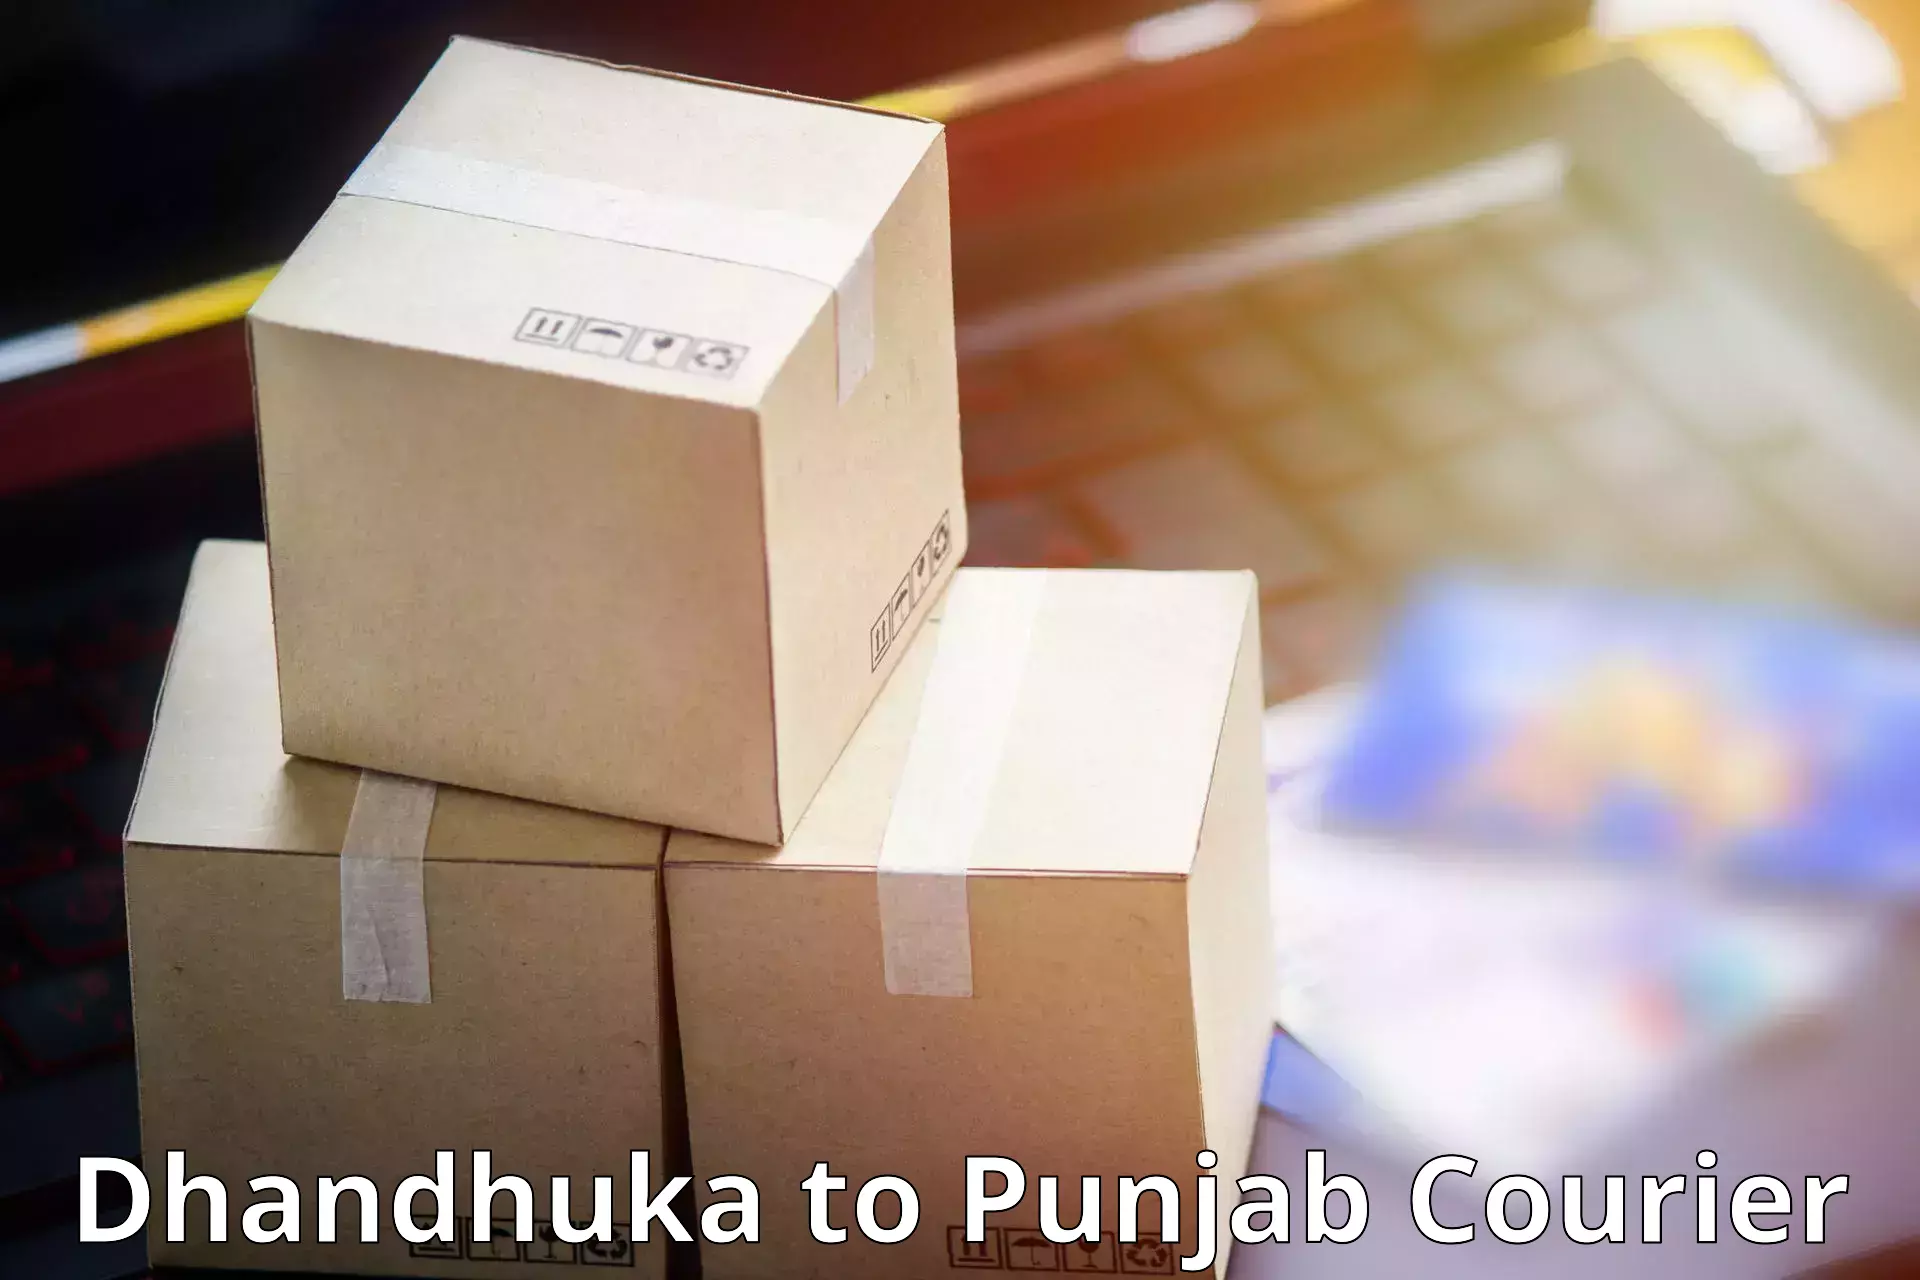 Global delivery options Dhandhuka to Sultanpur Lodhi